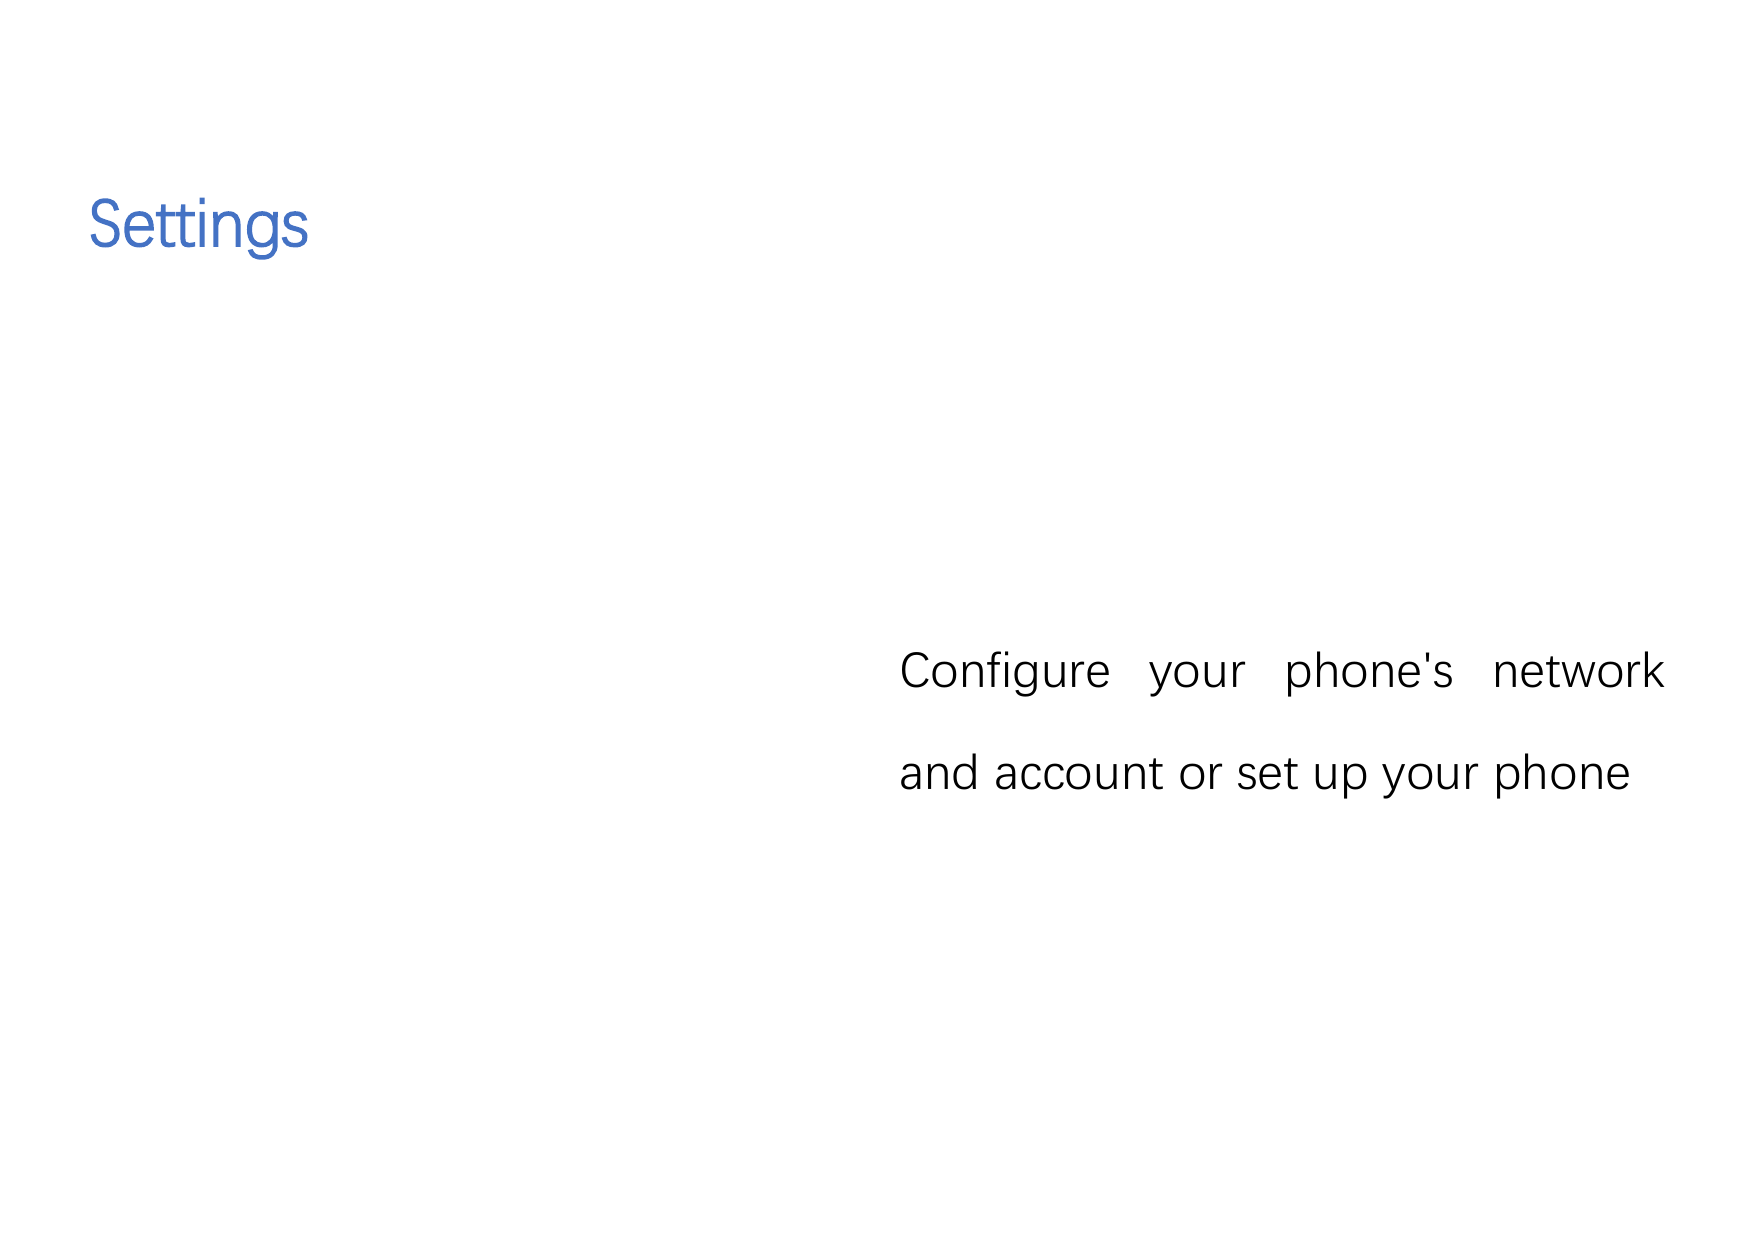 SettingsConfigure your phone's networkand account or set up your phone